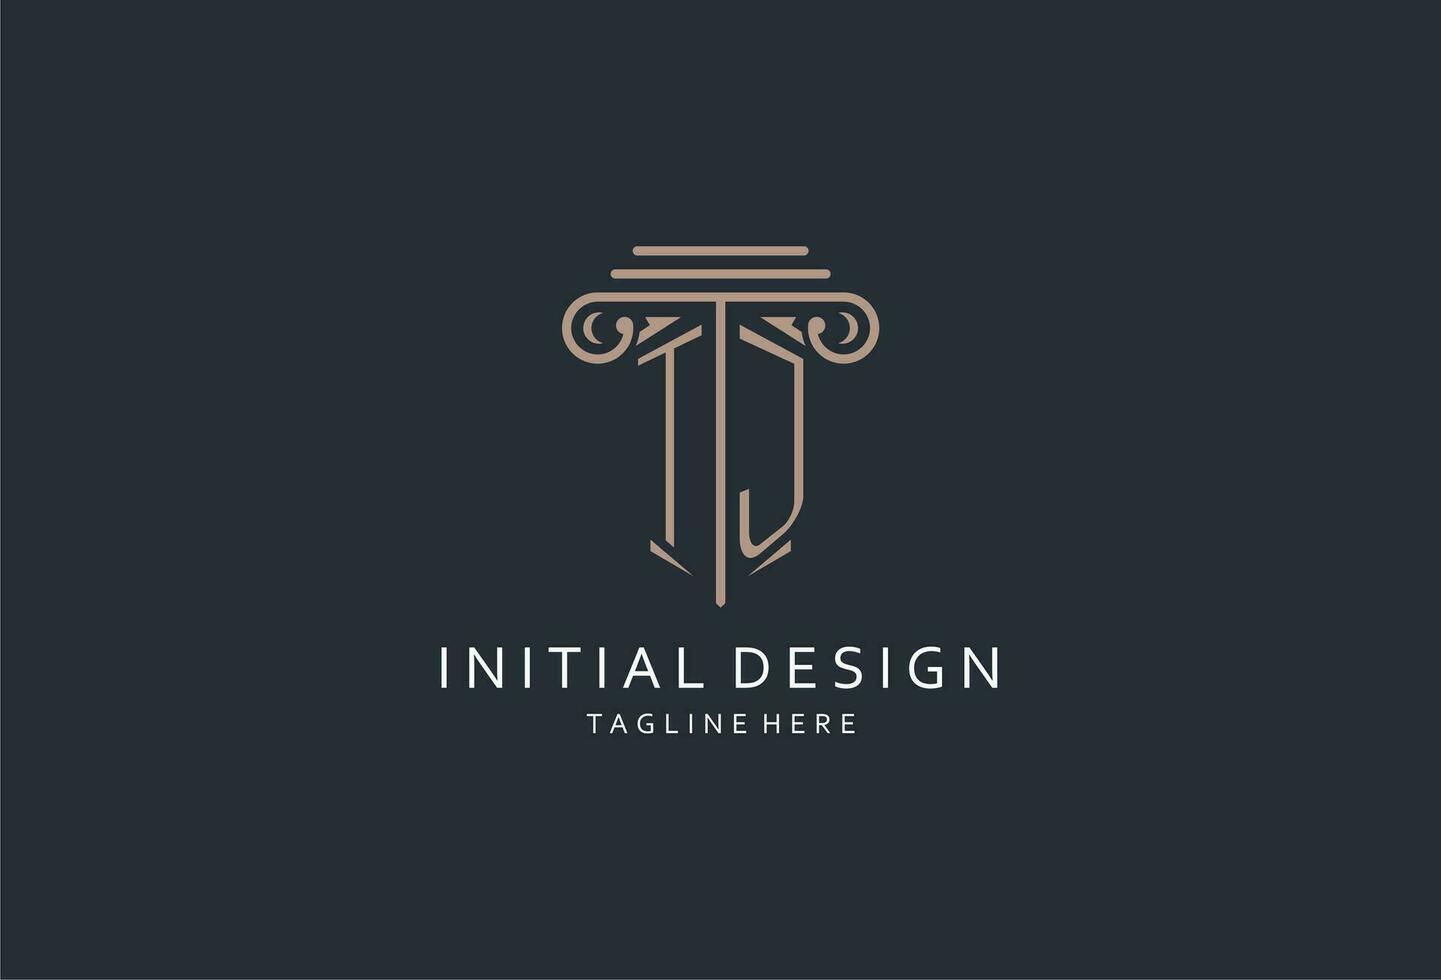 TJ monogram logo with pillar shape icon, luxury and elegant design logo for law firm initial style logo vector